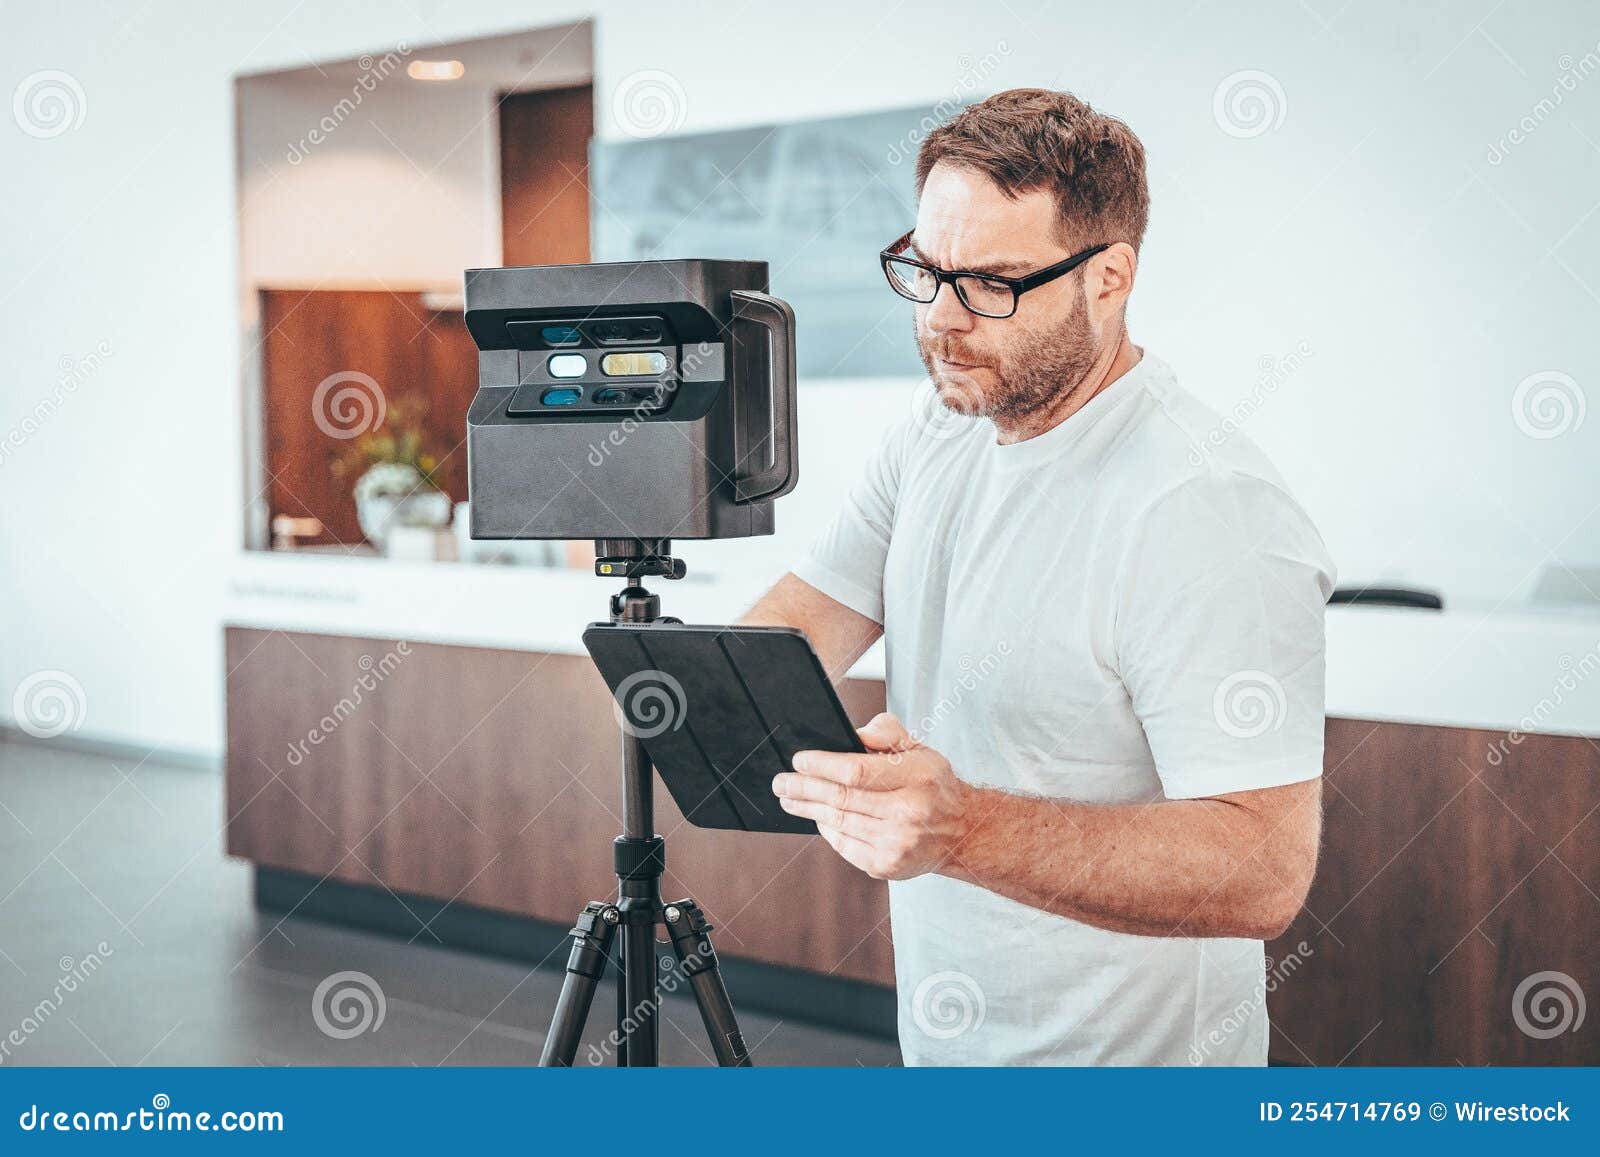 caucasian man with matterport camera and tablet doing 3d scan virtual tour indoors